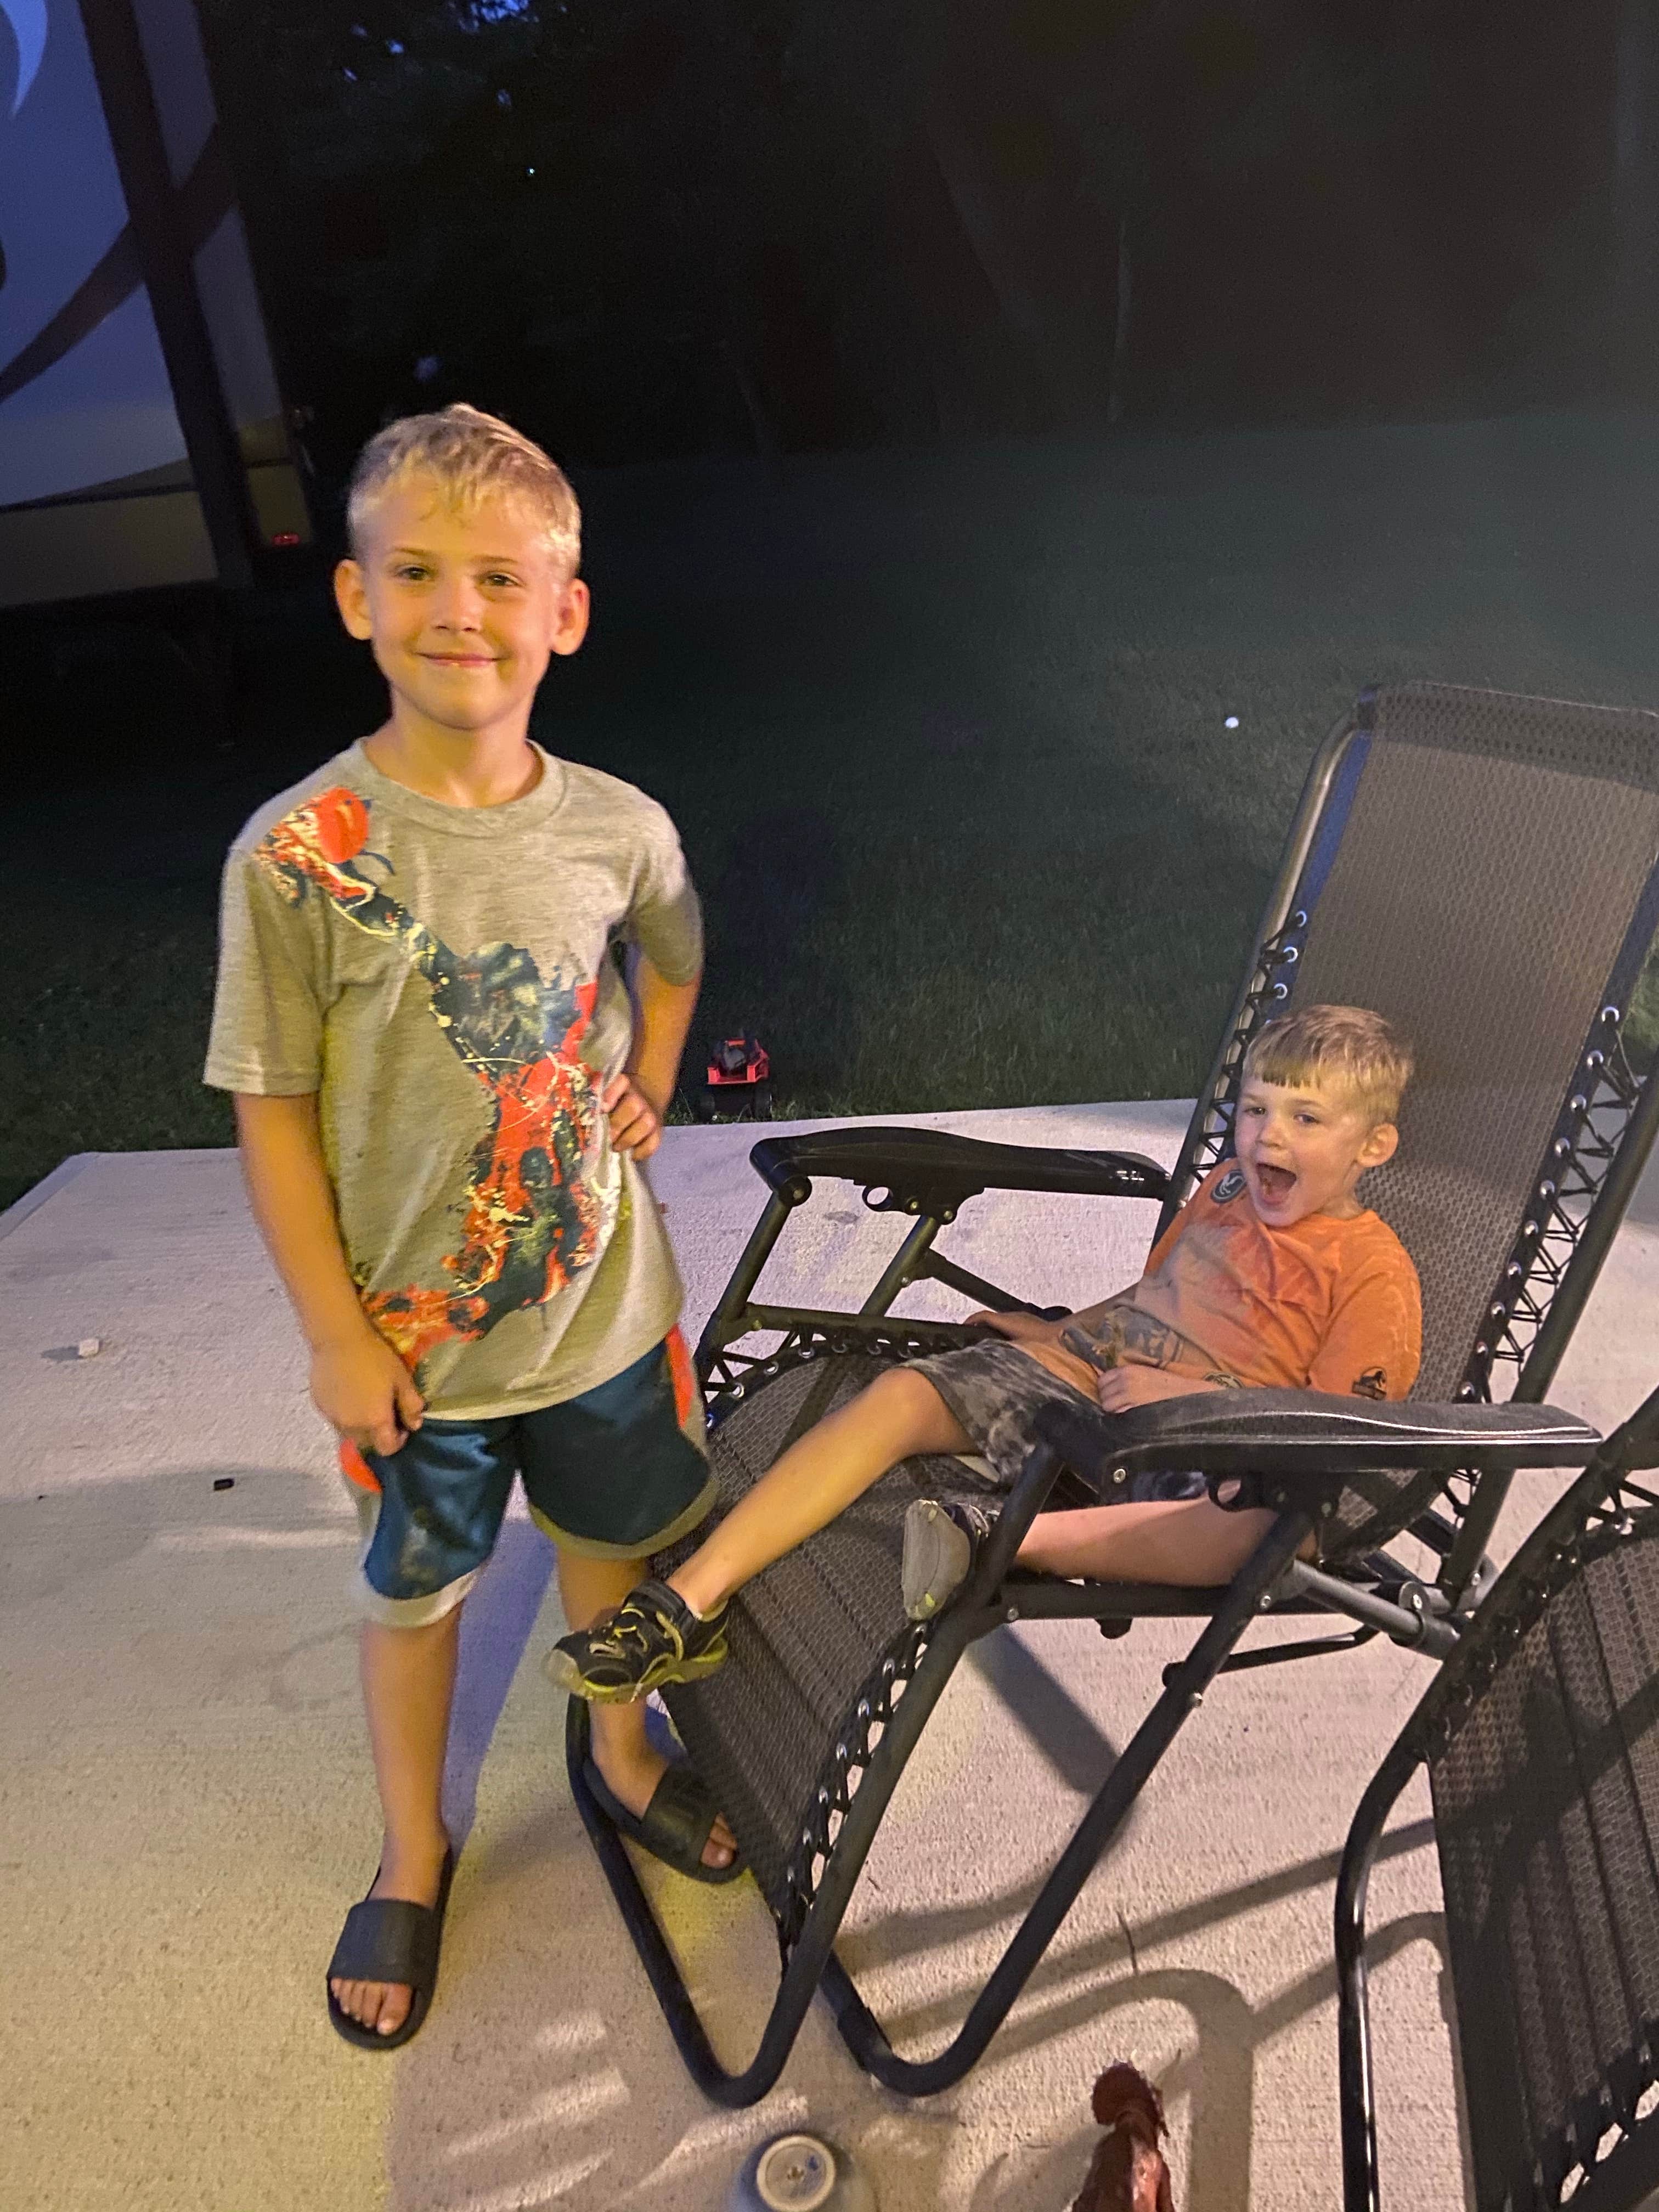 Camper submitted image from Kentucky Splash Waterpark & Campground - 5